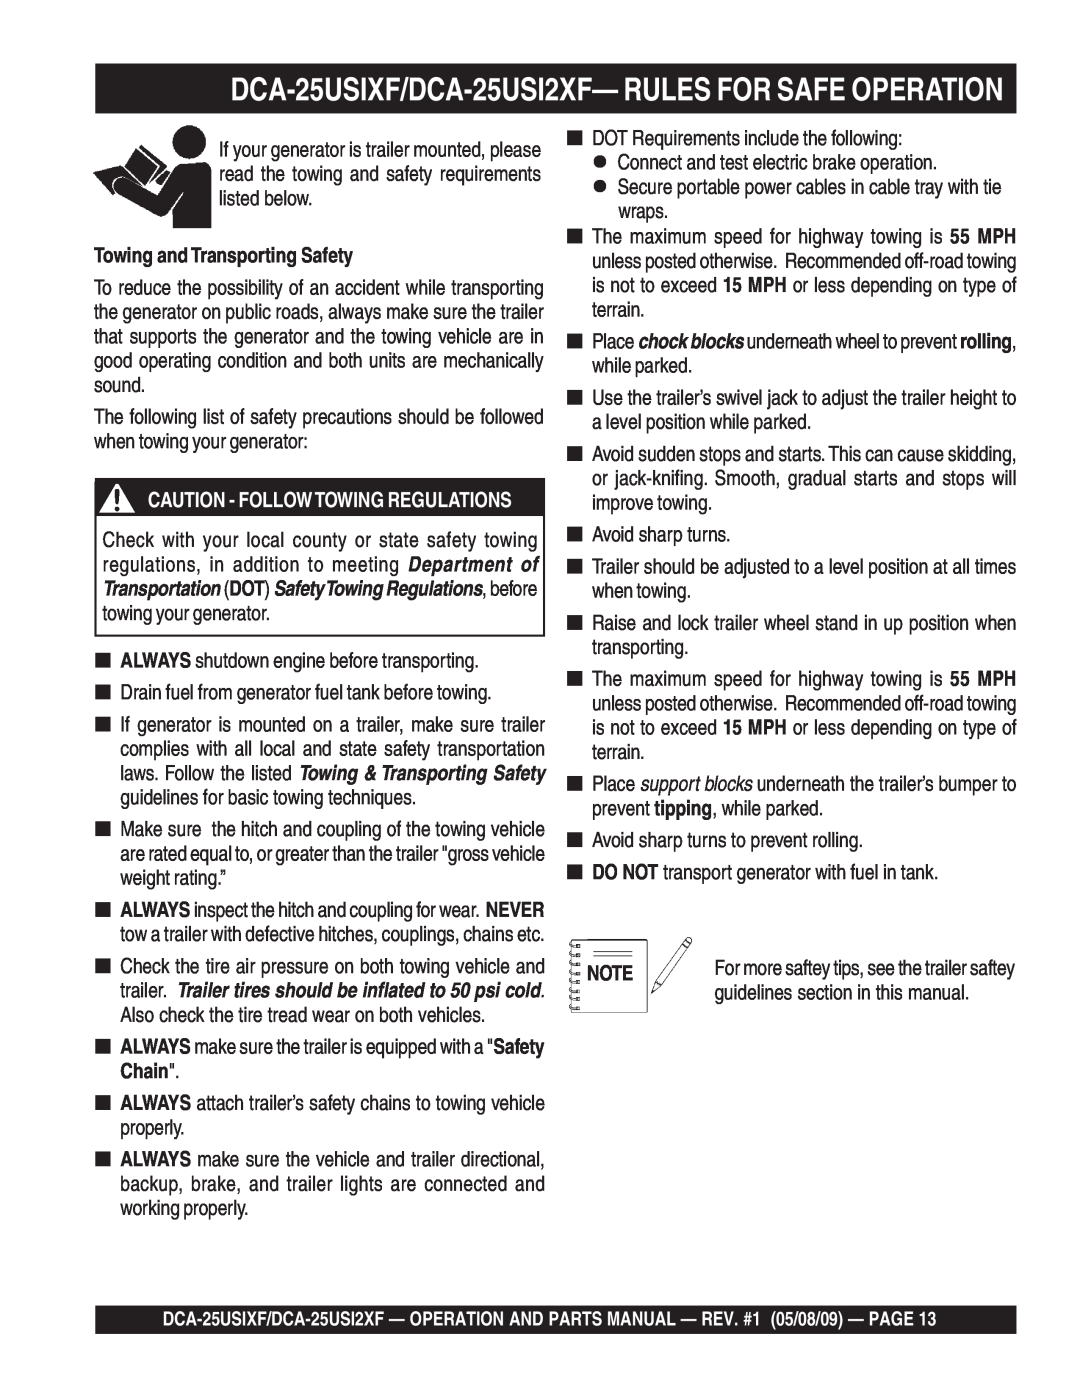 Multiquip operation manual Towing and Transporting Safety, DCA-25USIXF/DCA-25USI2XF- RULES FOR SAFE OPERATION 